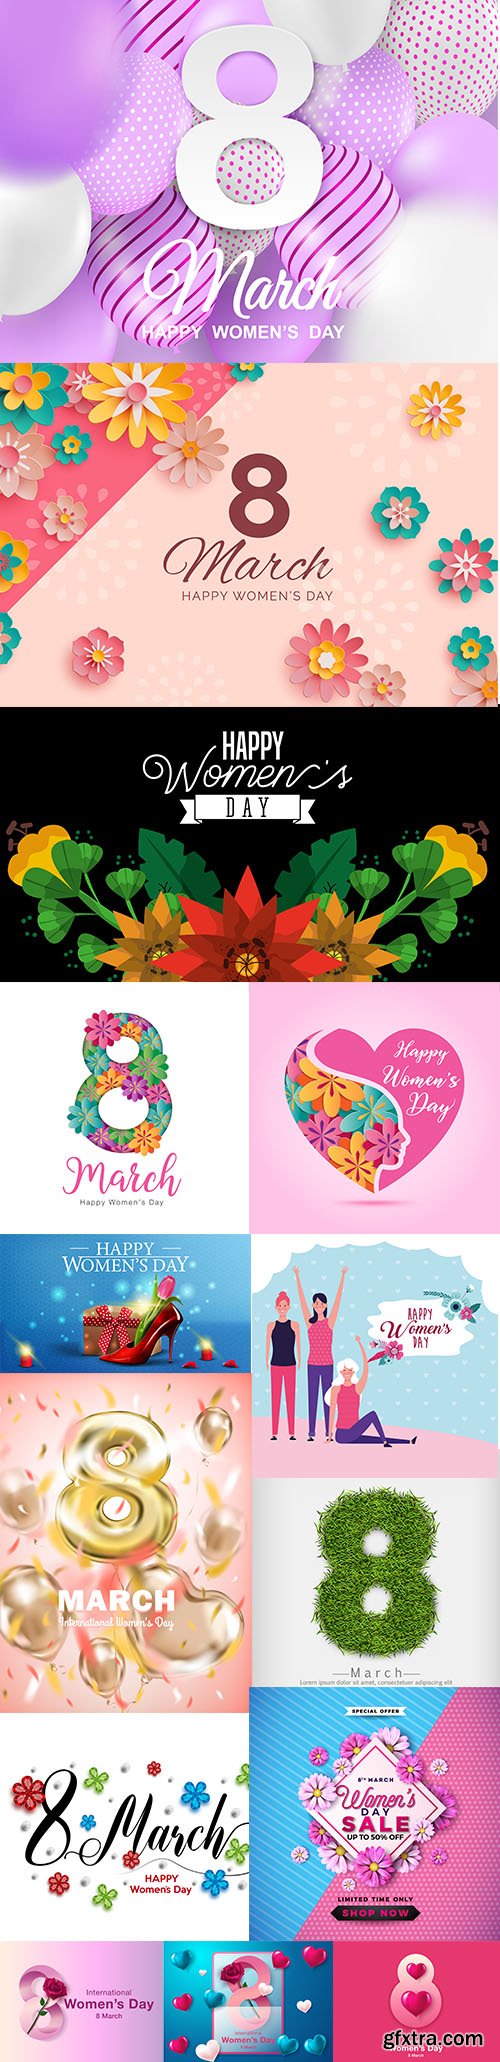 Vector Set of Womens Day Illustrations Vol 3